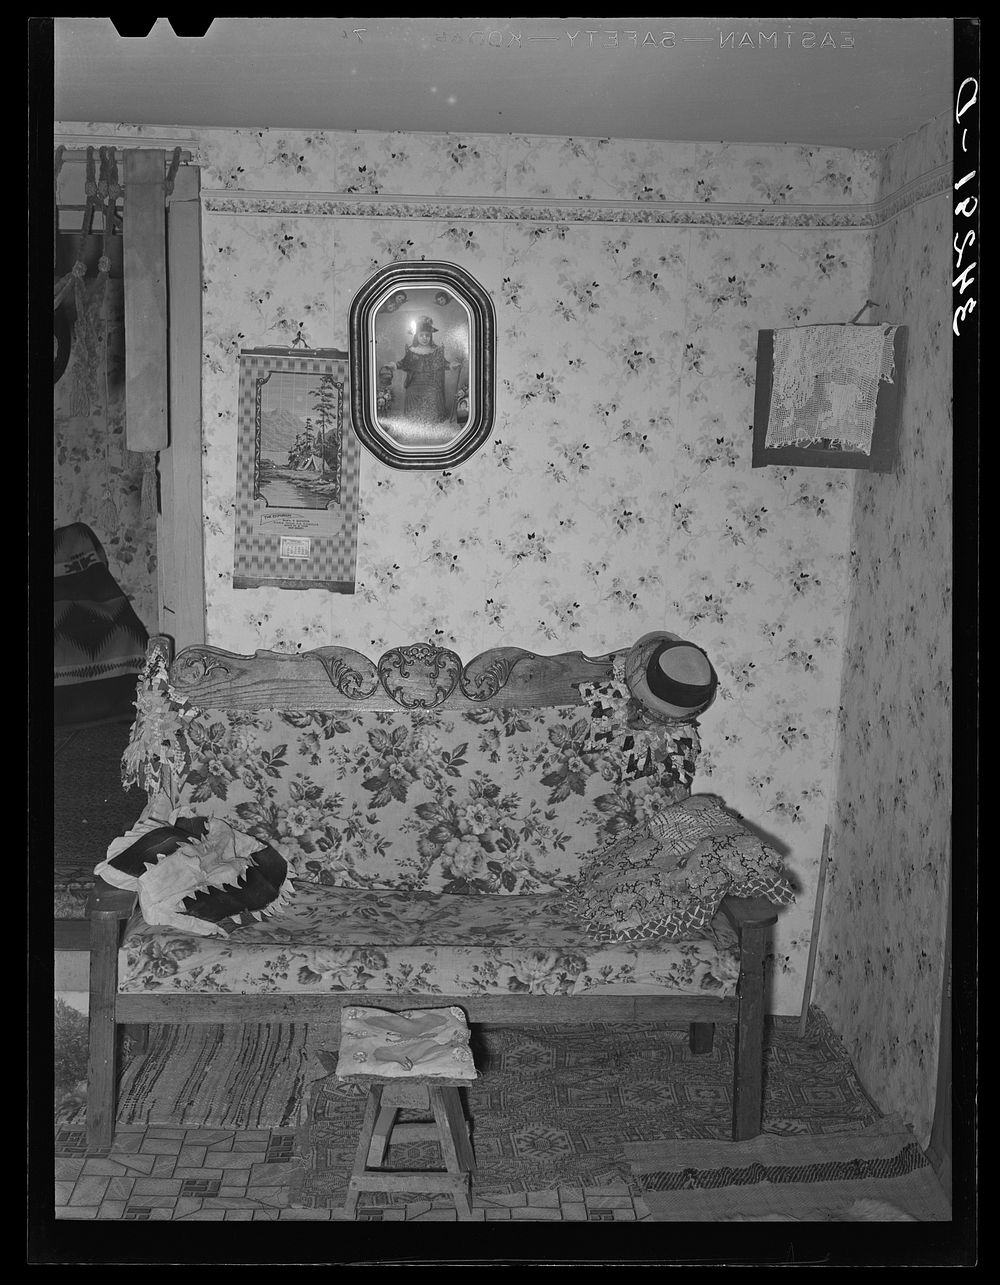 Corner of living room of Spanish-American family near Taos, New Mexico by Russell Lee